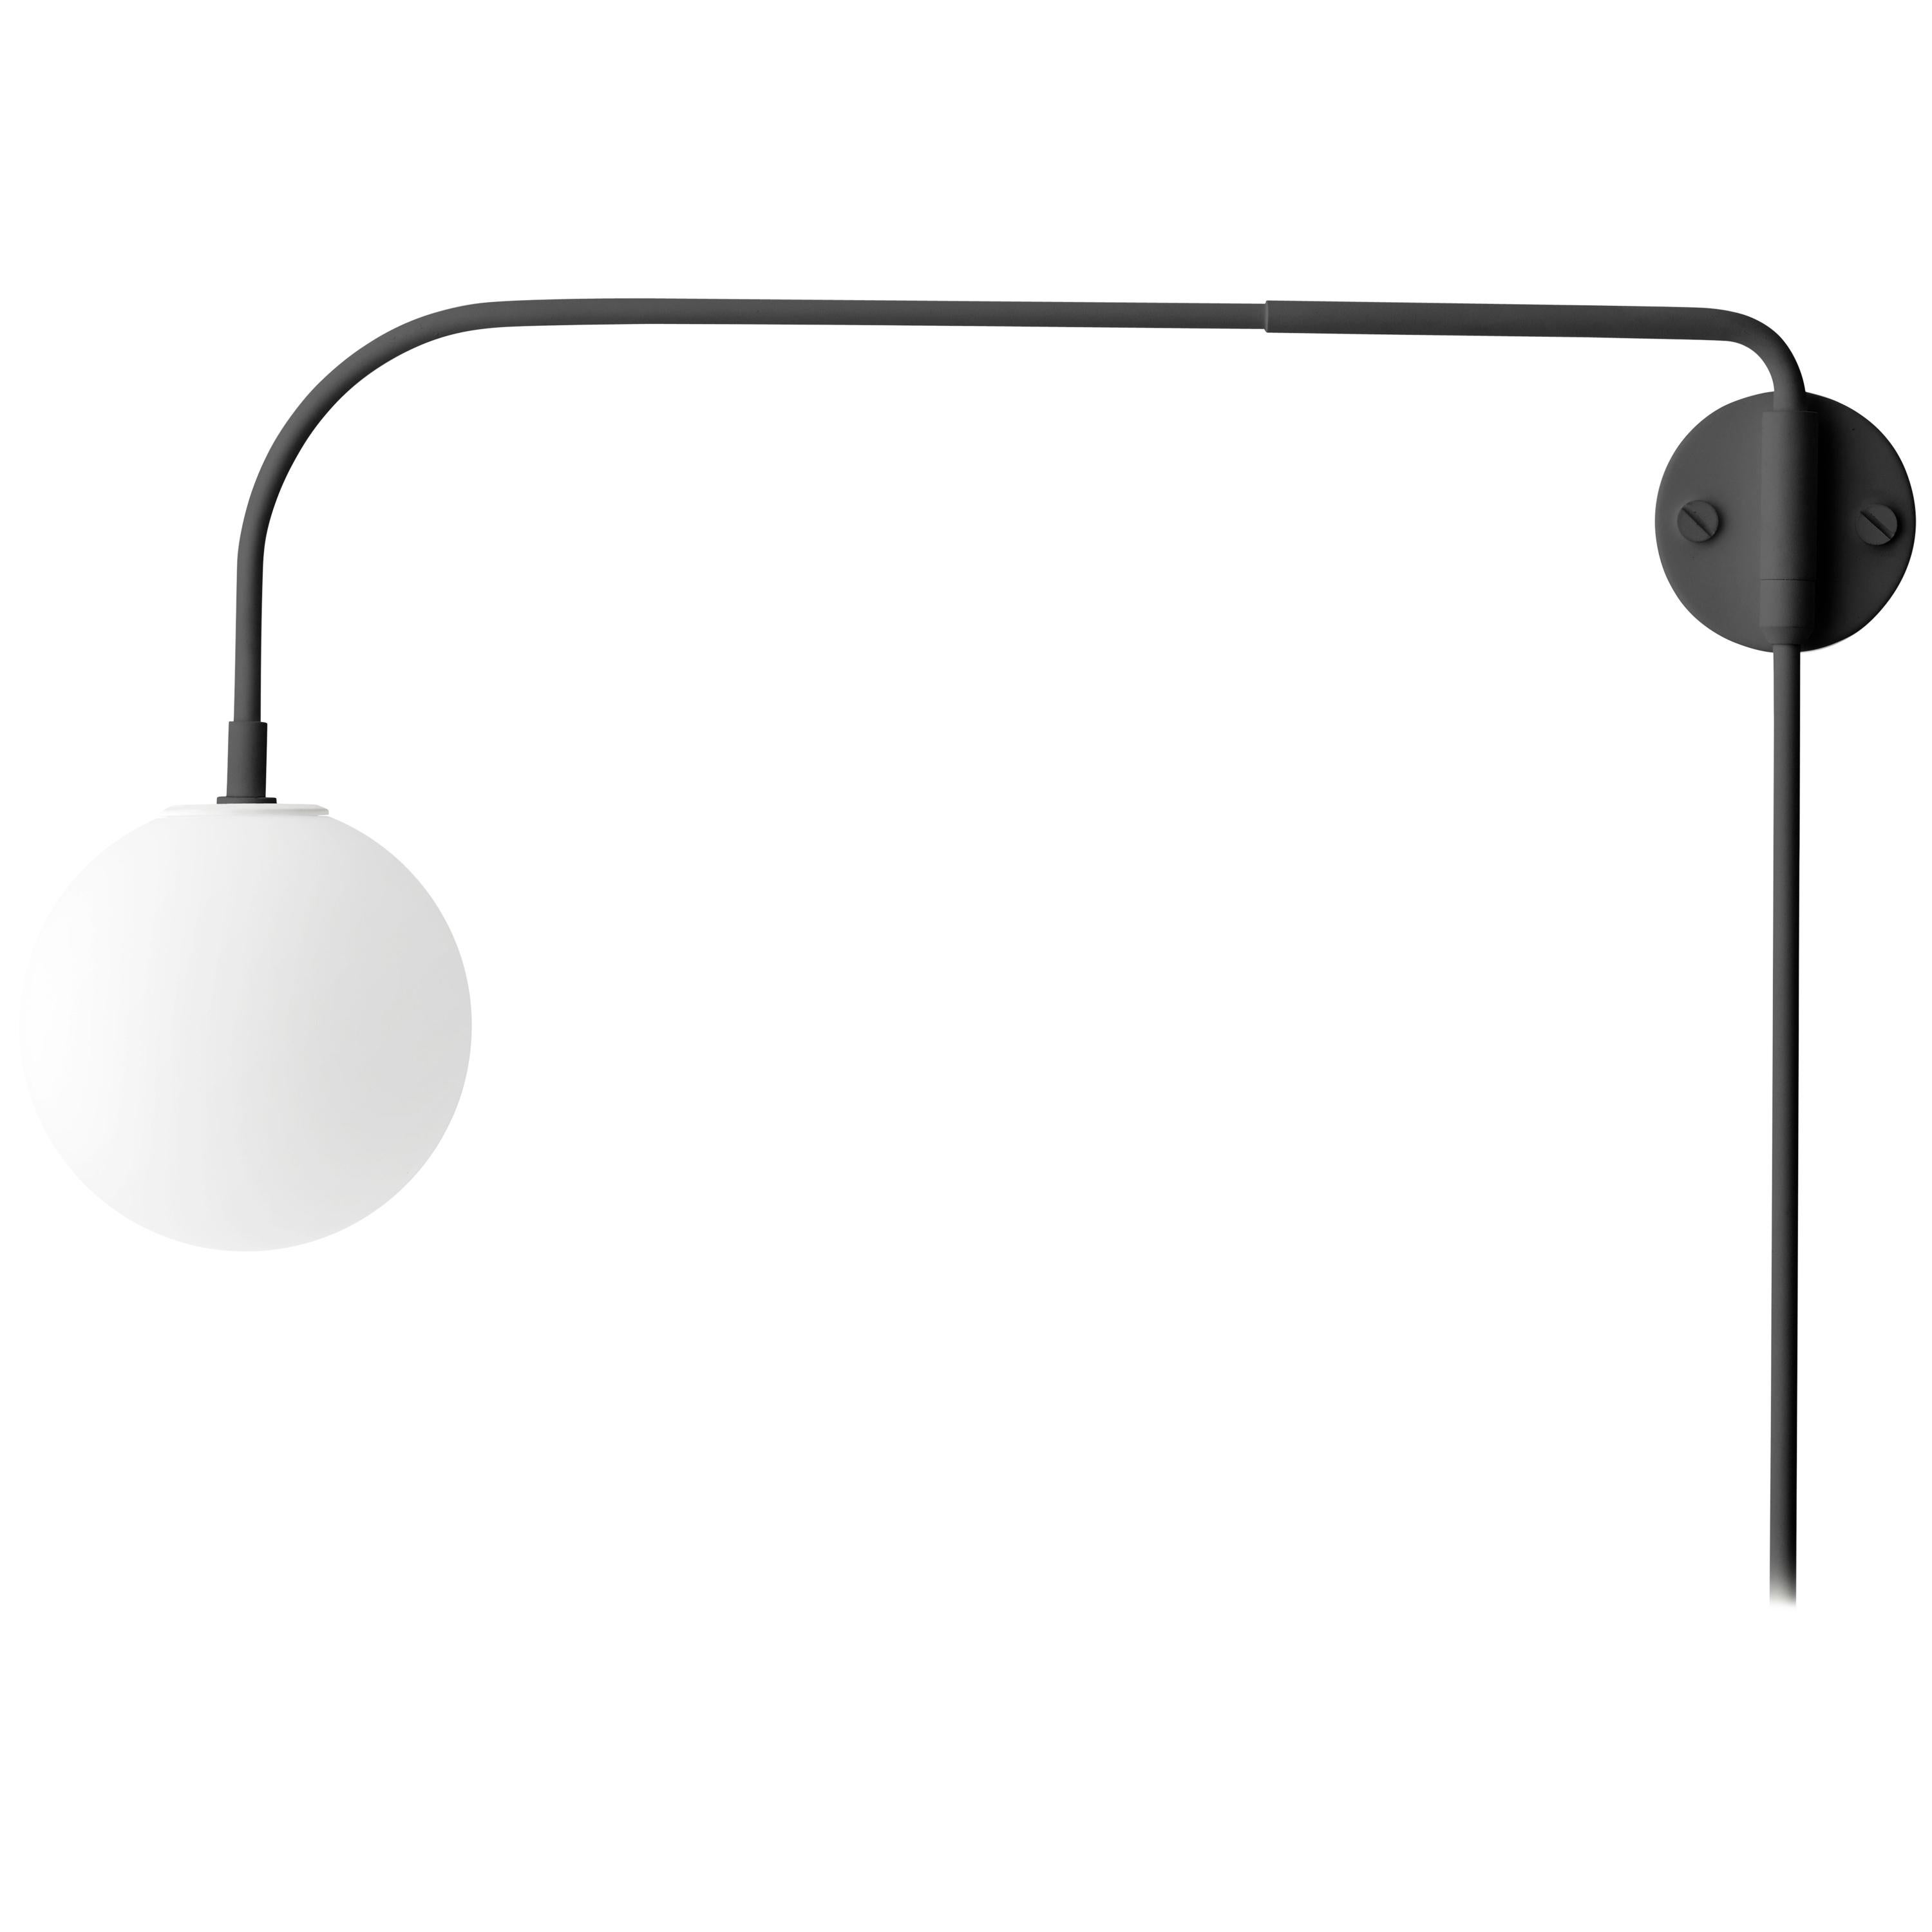 Warren Wall Lamp, Black, and One TR Matte Bulb For Sale